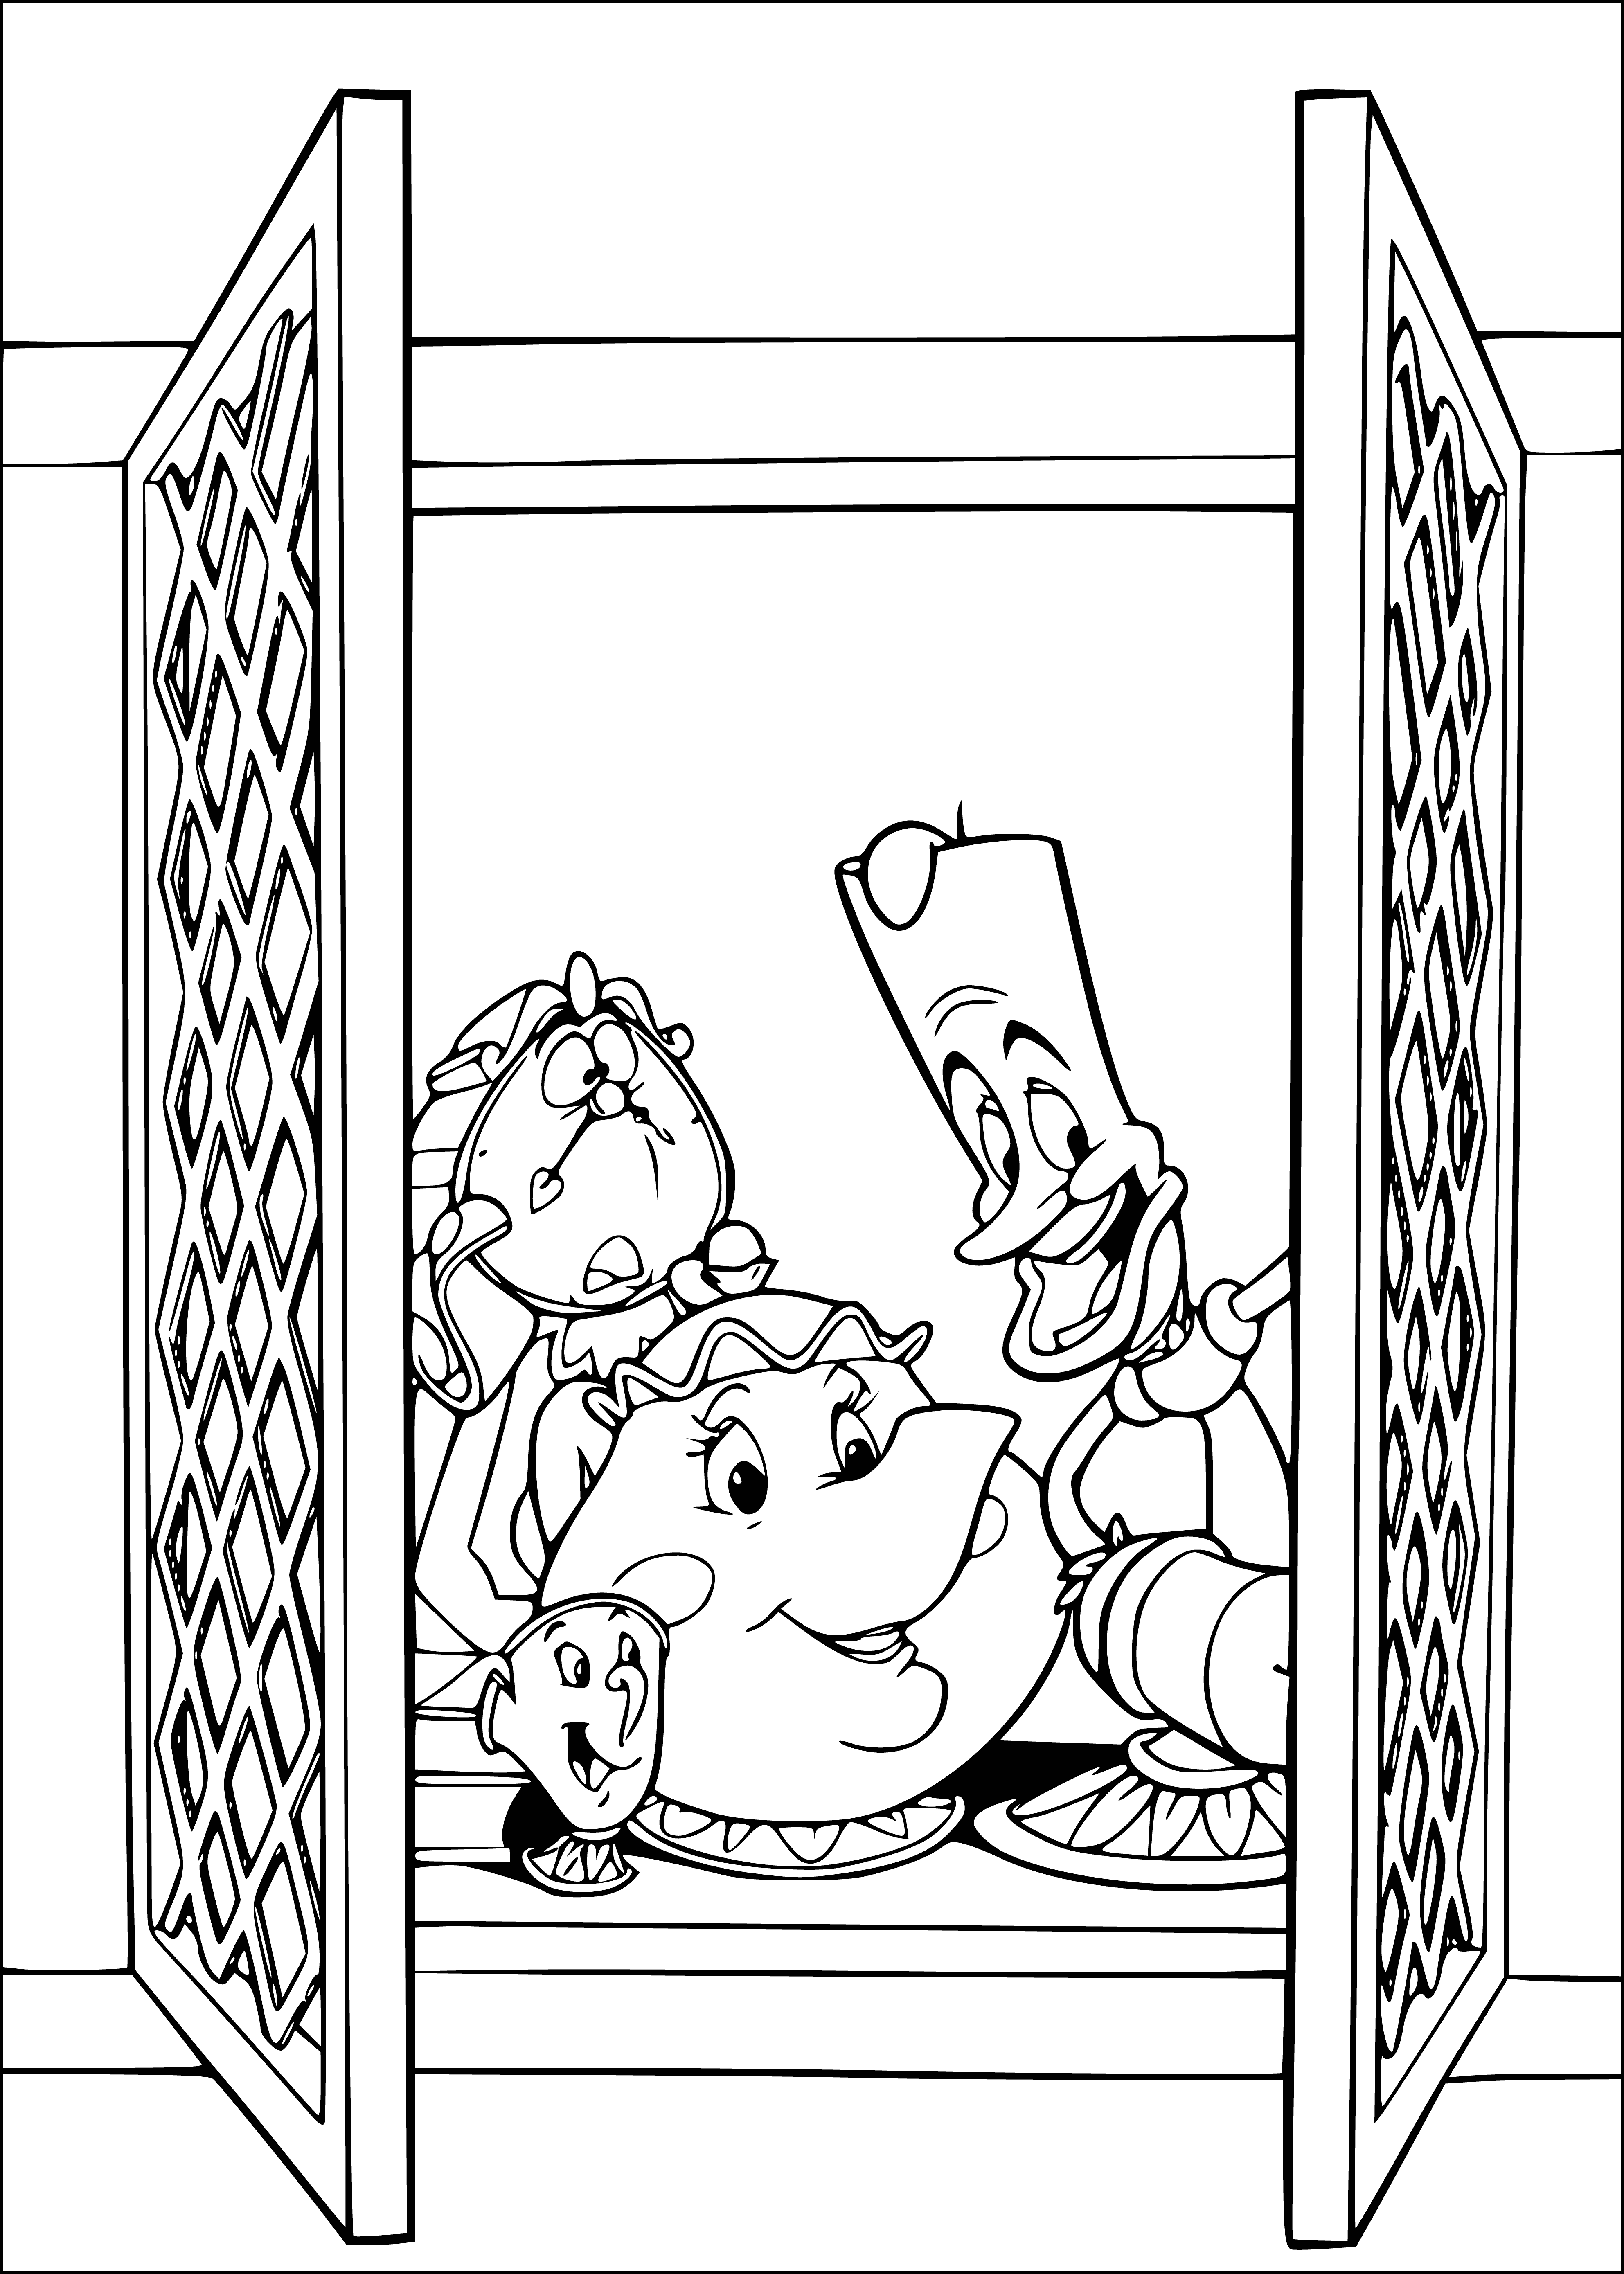 coloring page: Belle meets the Beast: massive, shaggy brown fur, horns, eyes glowing yellow, mouth open in a growl. Maurice & castle staff stand in awe.